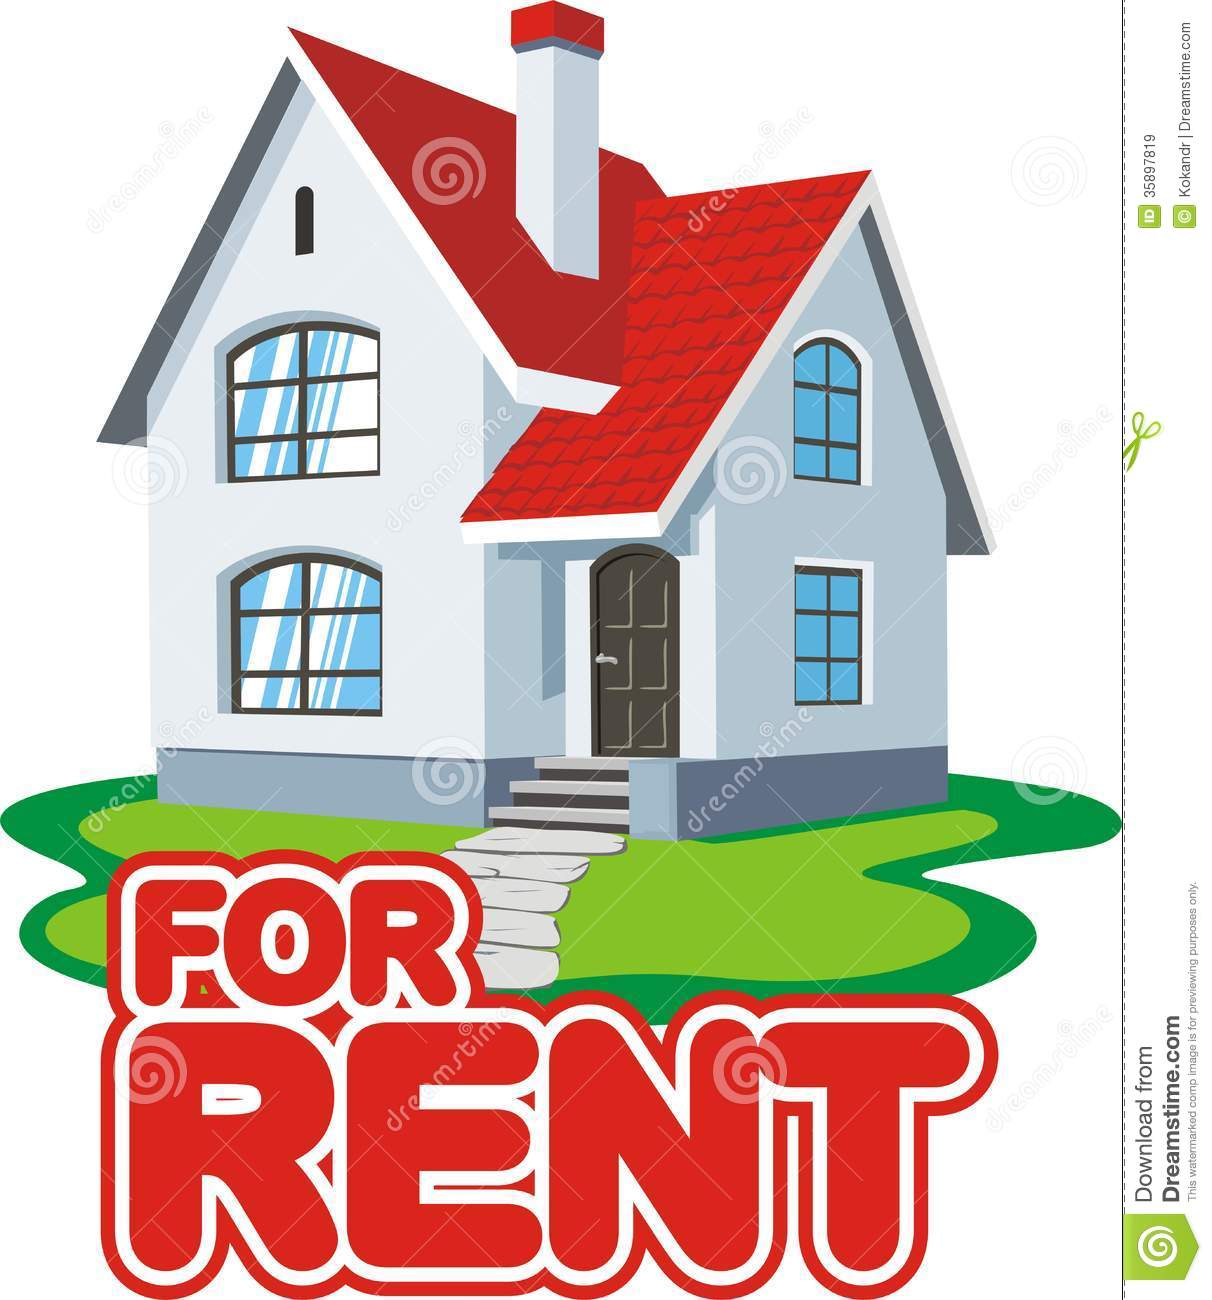 House For Rent Royalty Free Stock Images   Image  35897819